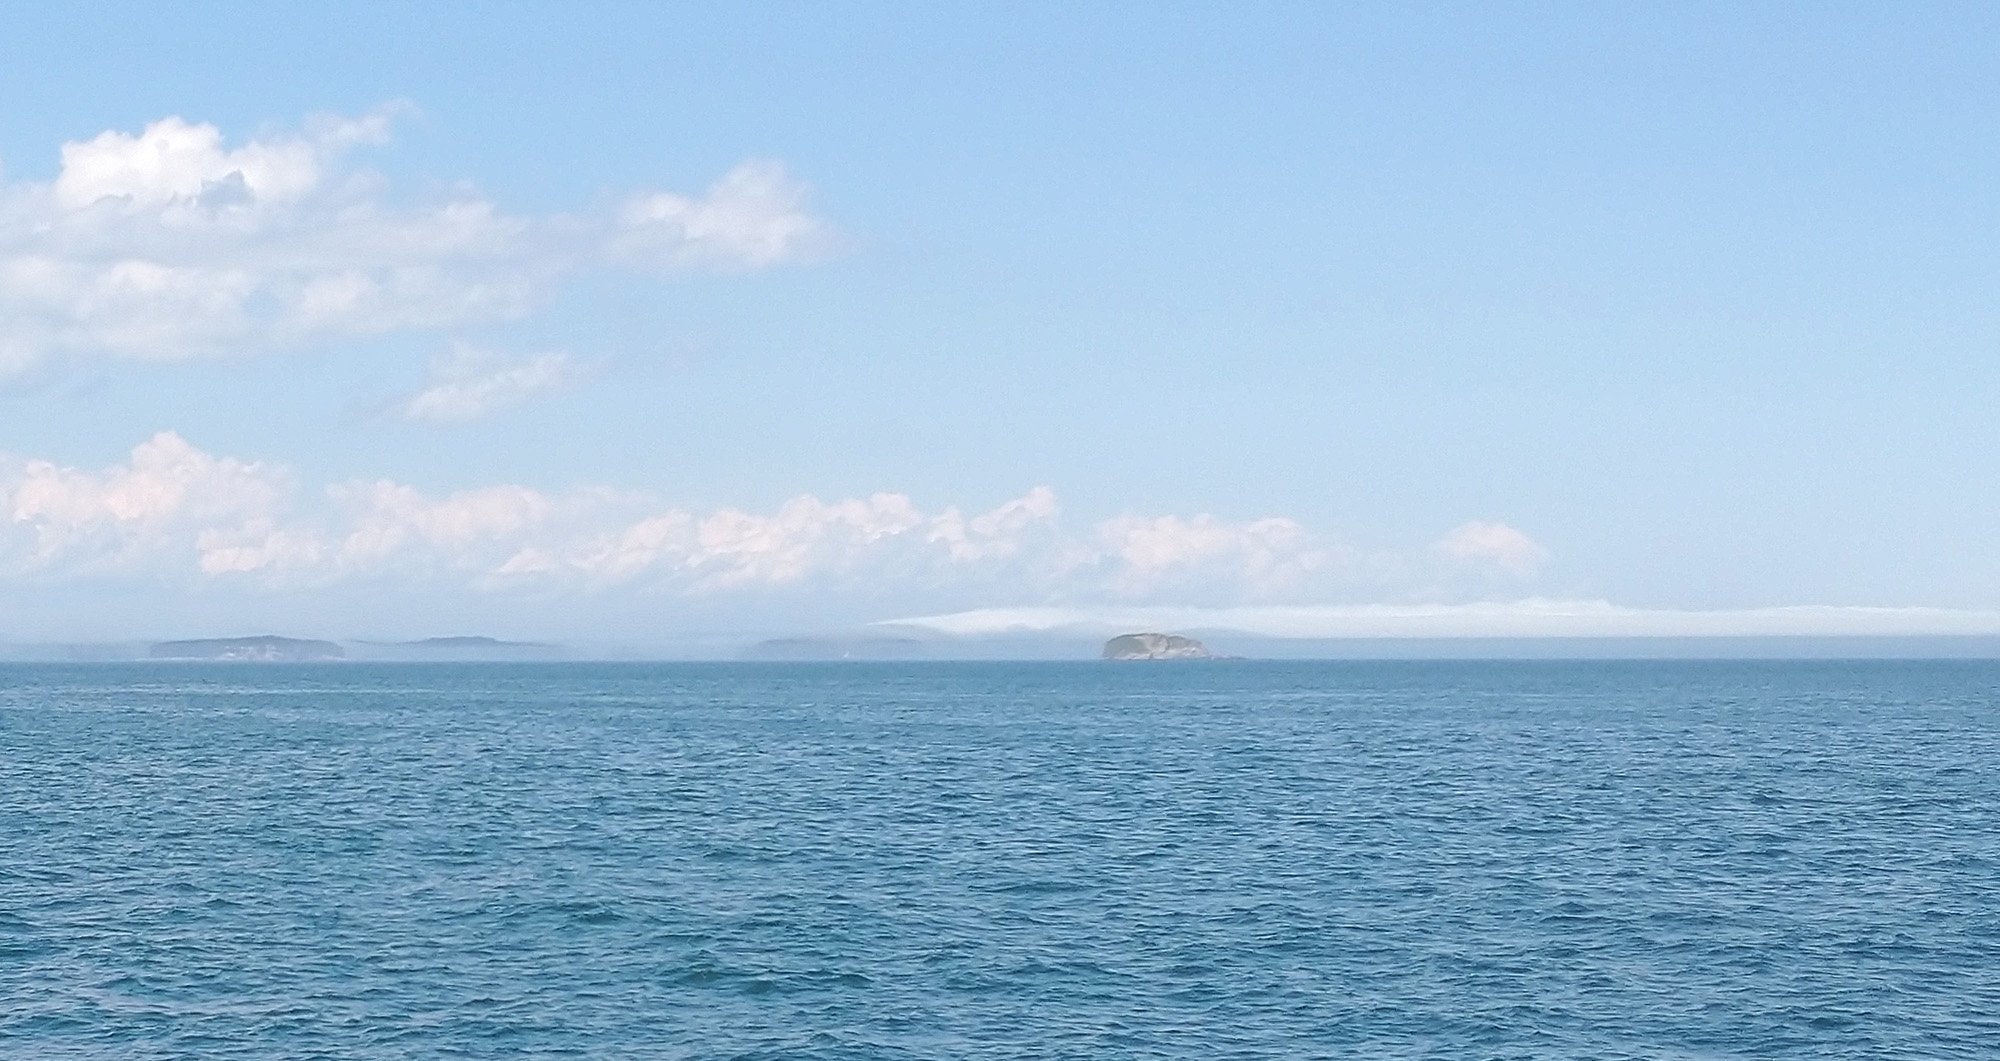 There was this cool island in the distance with fog warping around it.